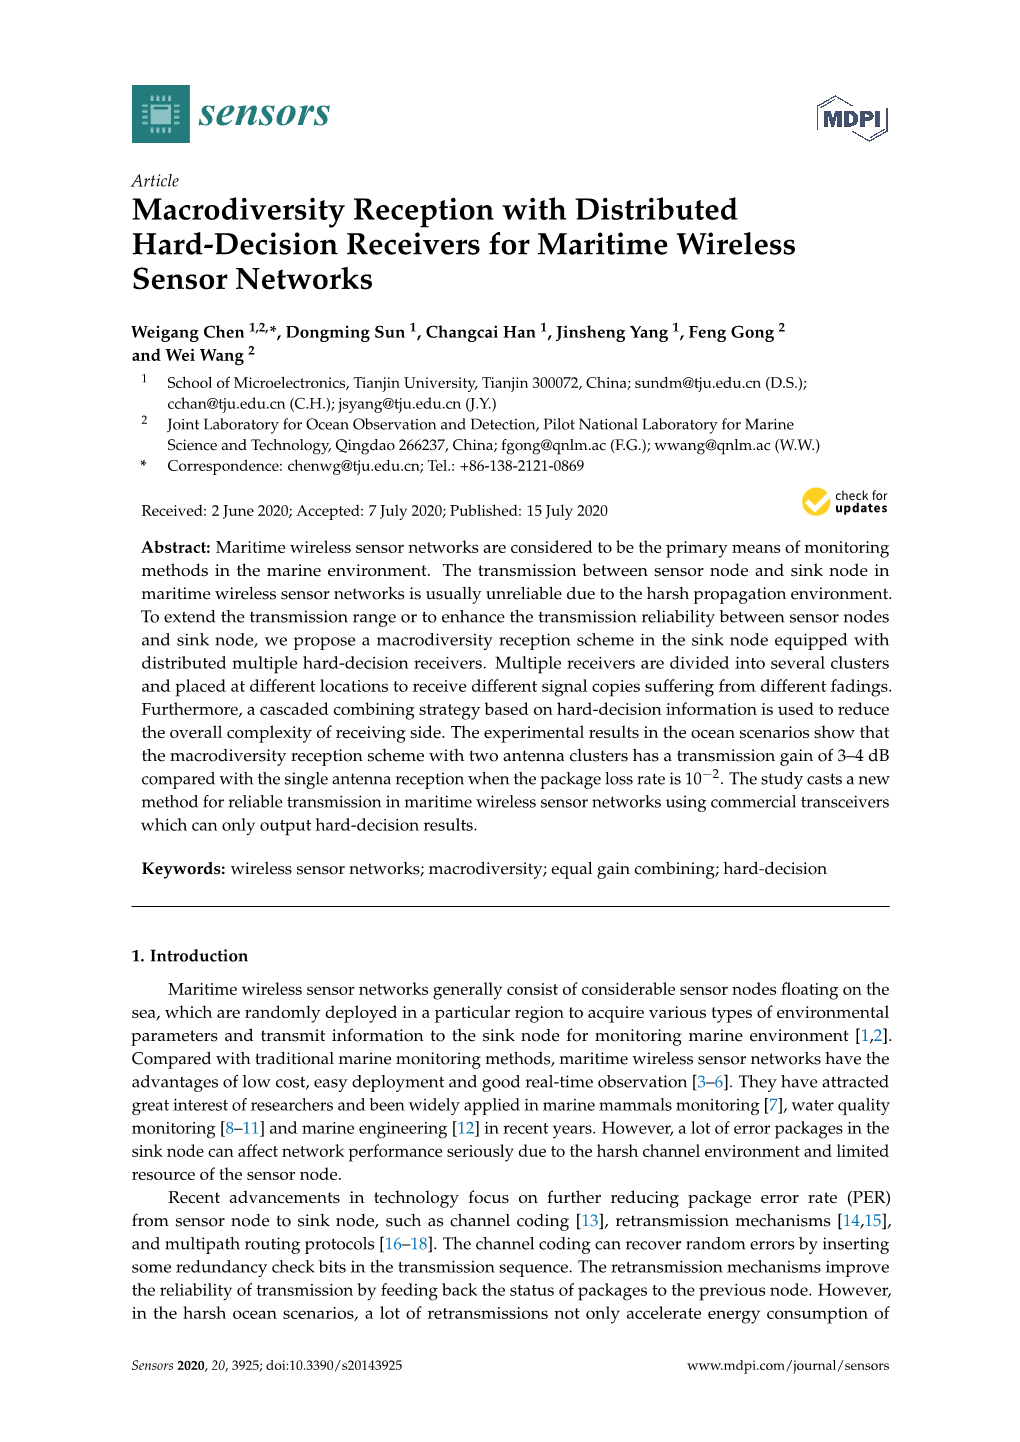 Macrodiversity Reception with Distributed Hard-Decision Receivers for Maritime Wireless Sensor Networks